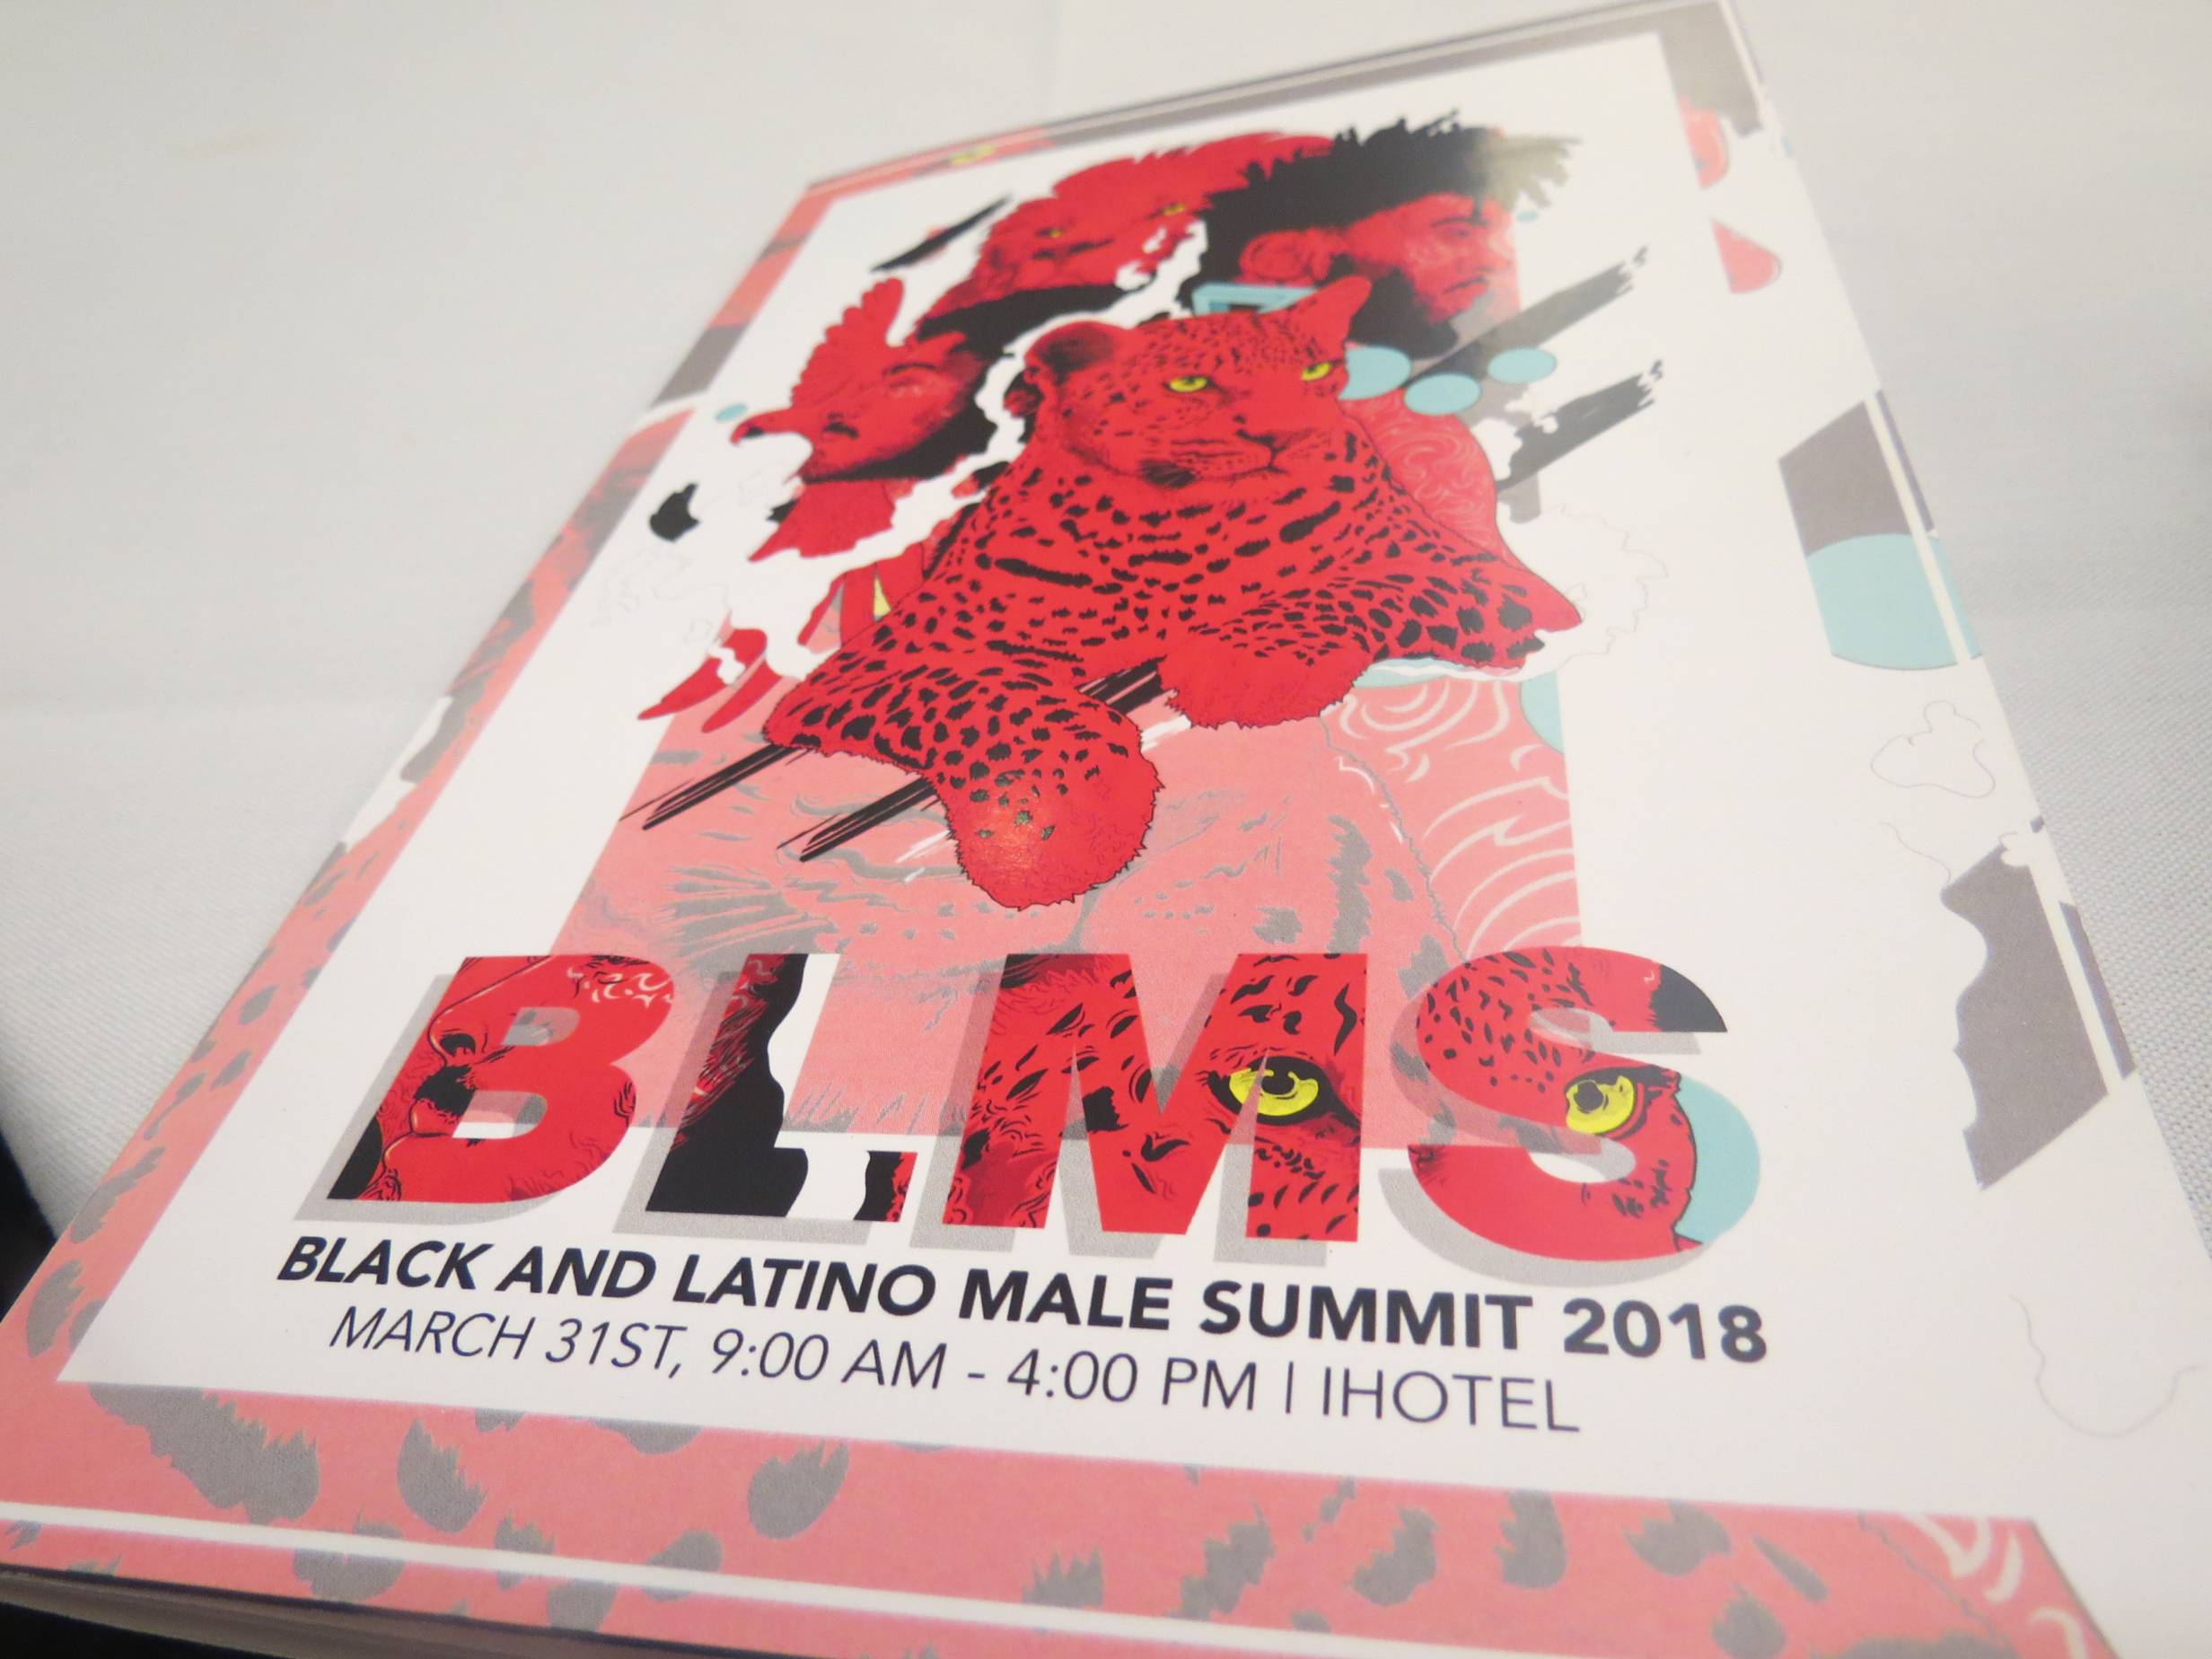 Between MLK and Stephon Clark: Passing the torch at the 2018 Black & Latino Male Summit